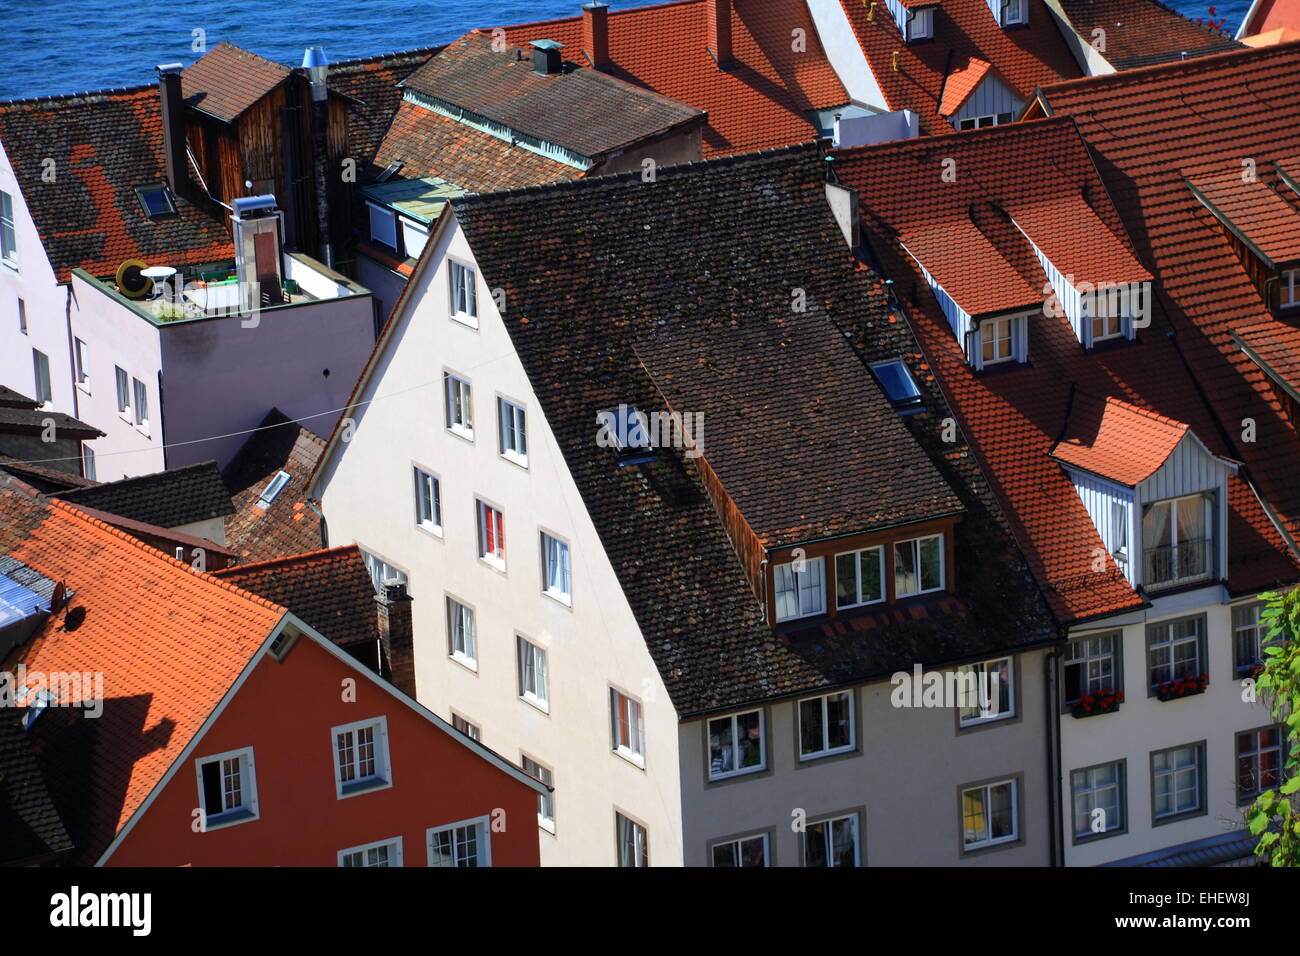 Roofs of small German town. Stock Photo